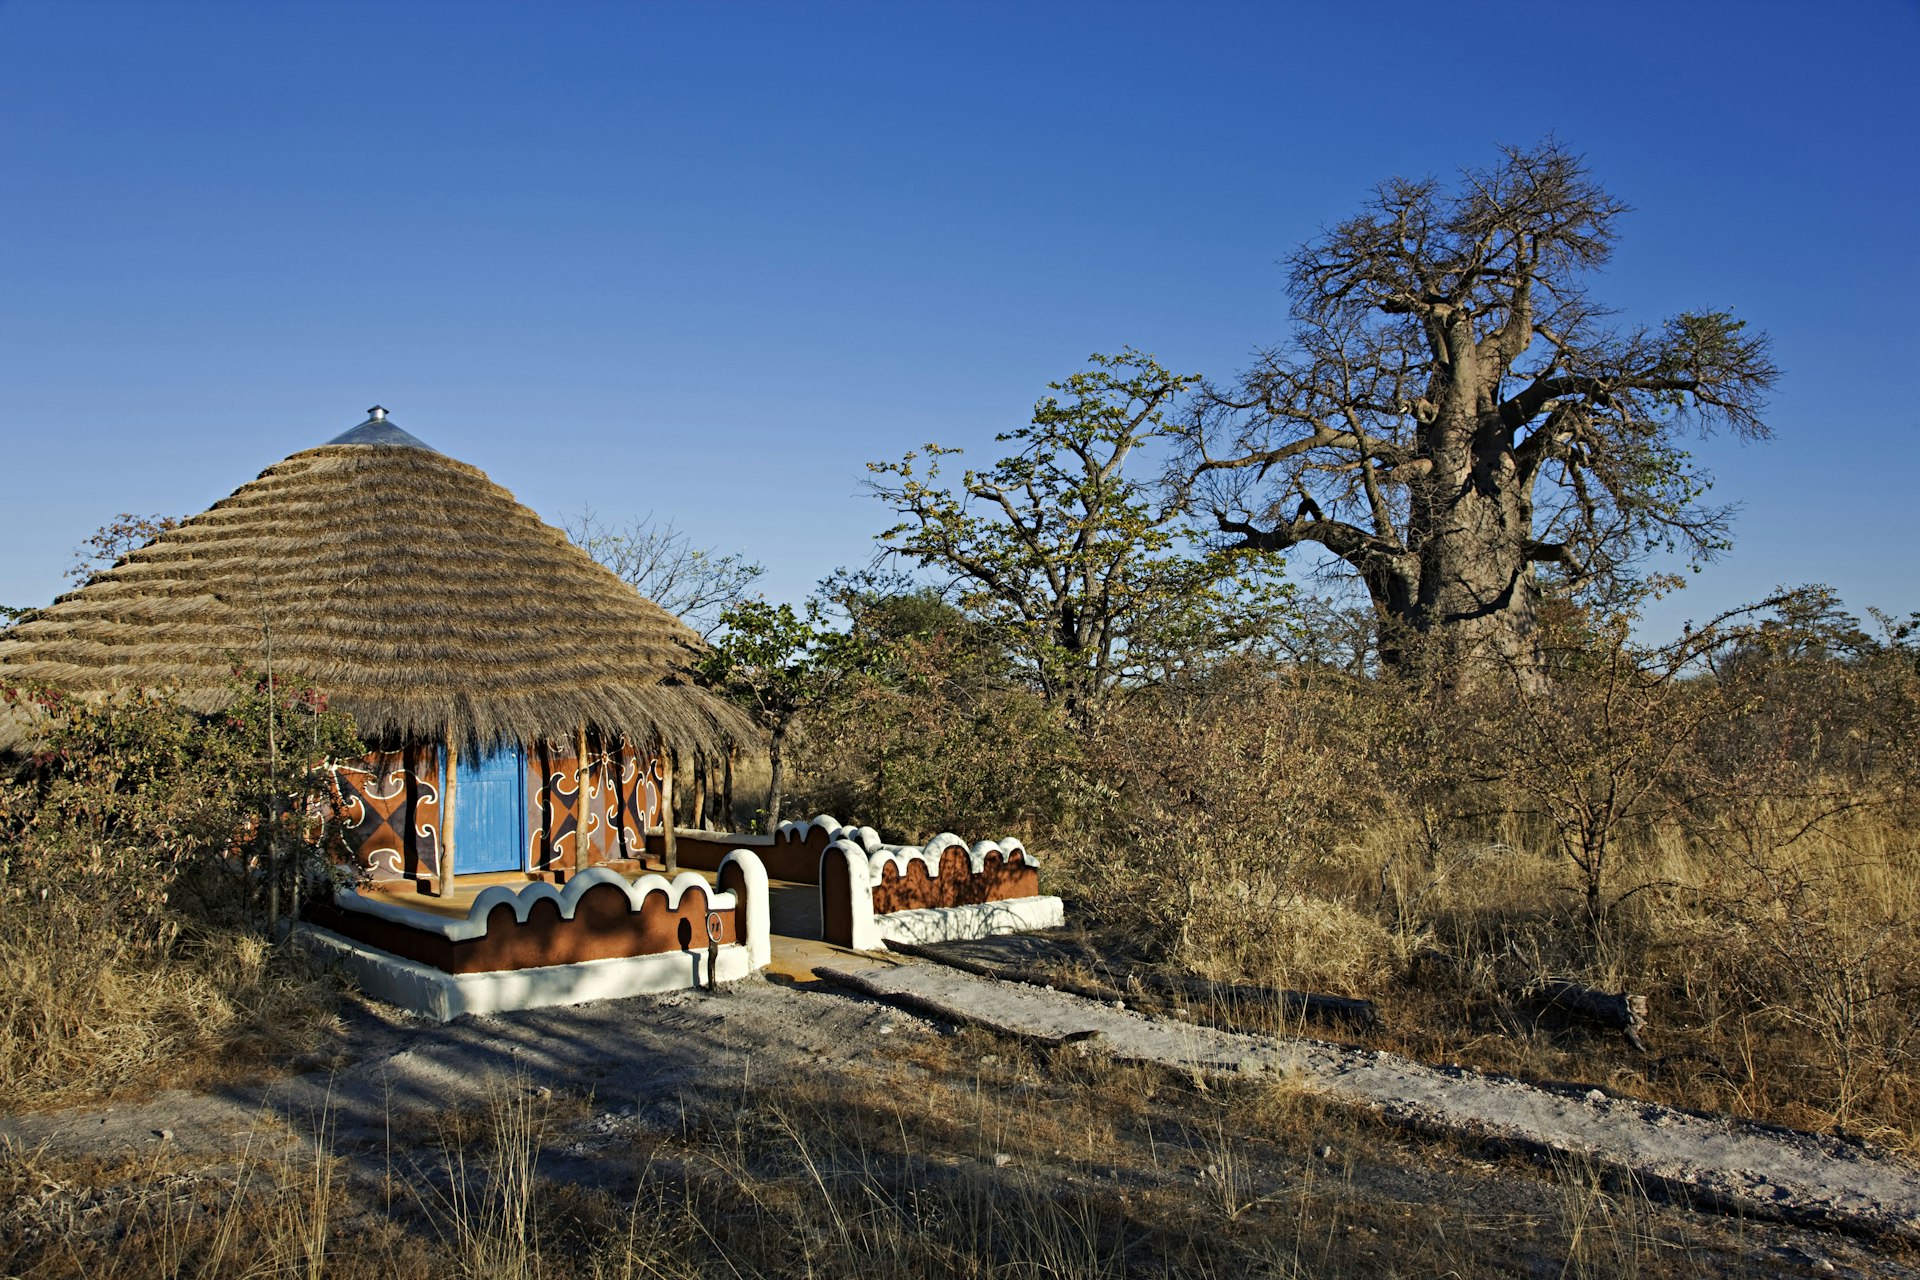 Thatched hut painted with traditionally styled Bakalanga decorative designs. Planet Baobab, Botswana. (PR: Property Released)